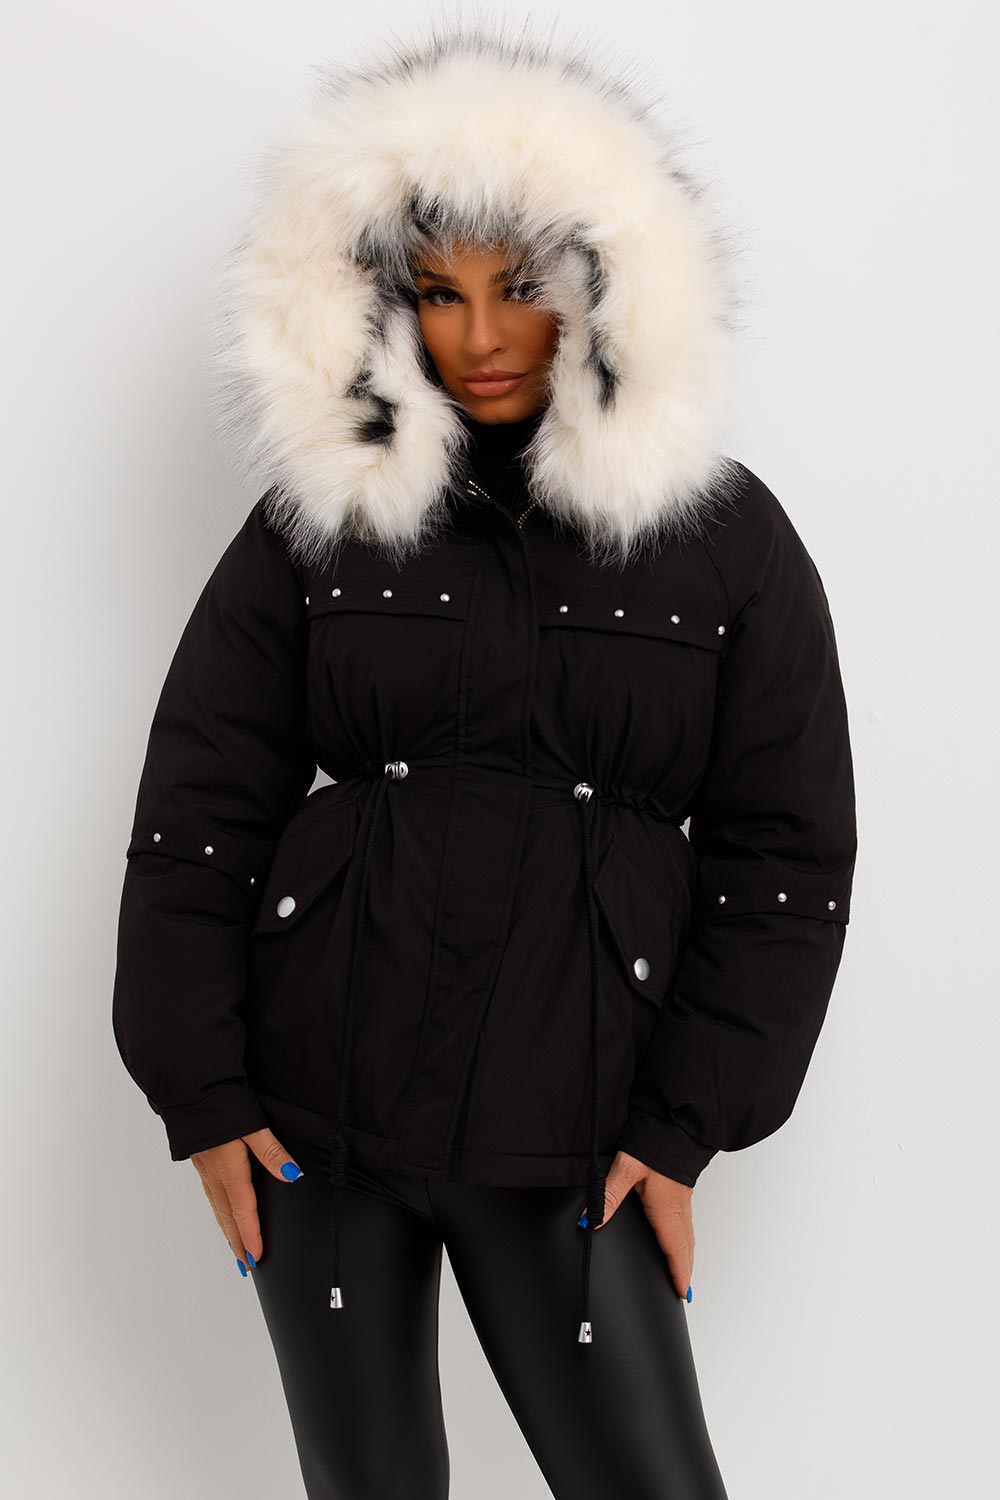 womens parka coat with drawstring waist and big faux fur hood